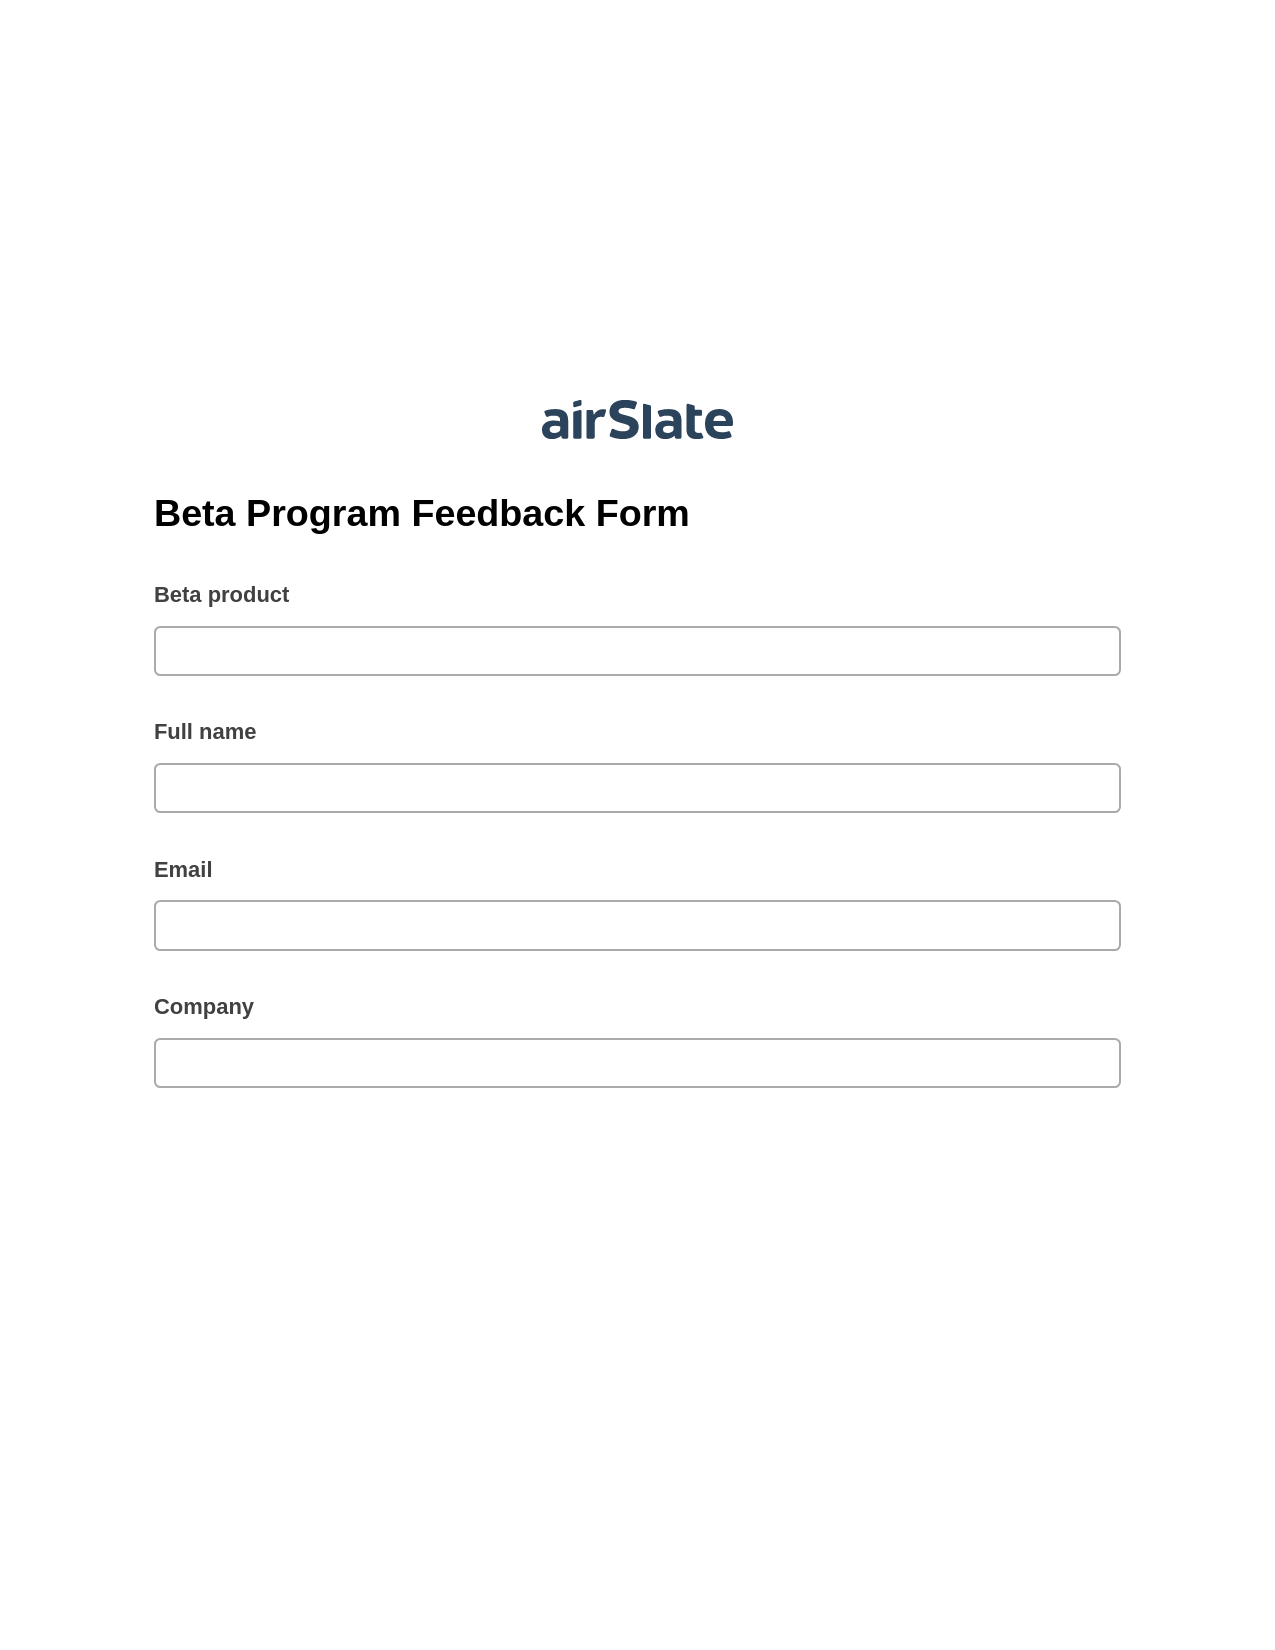 Multirole Beta Program Feedback Form Pre-fill from Excel Spreadsheet Bot, Send a Slate to Salesforce Contact Bot, Export to Formstack Documents Bot